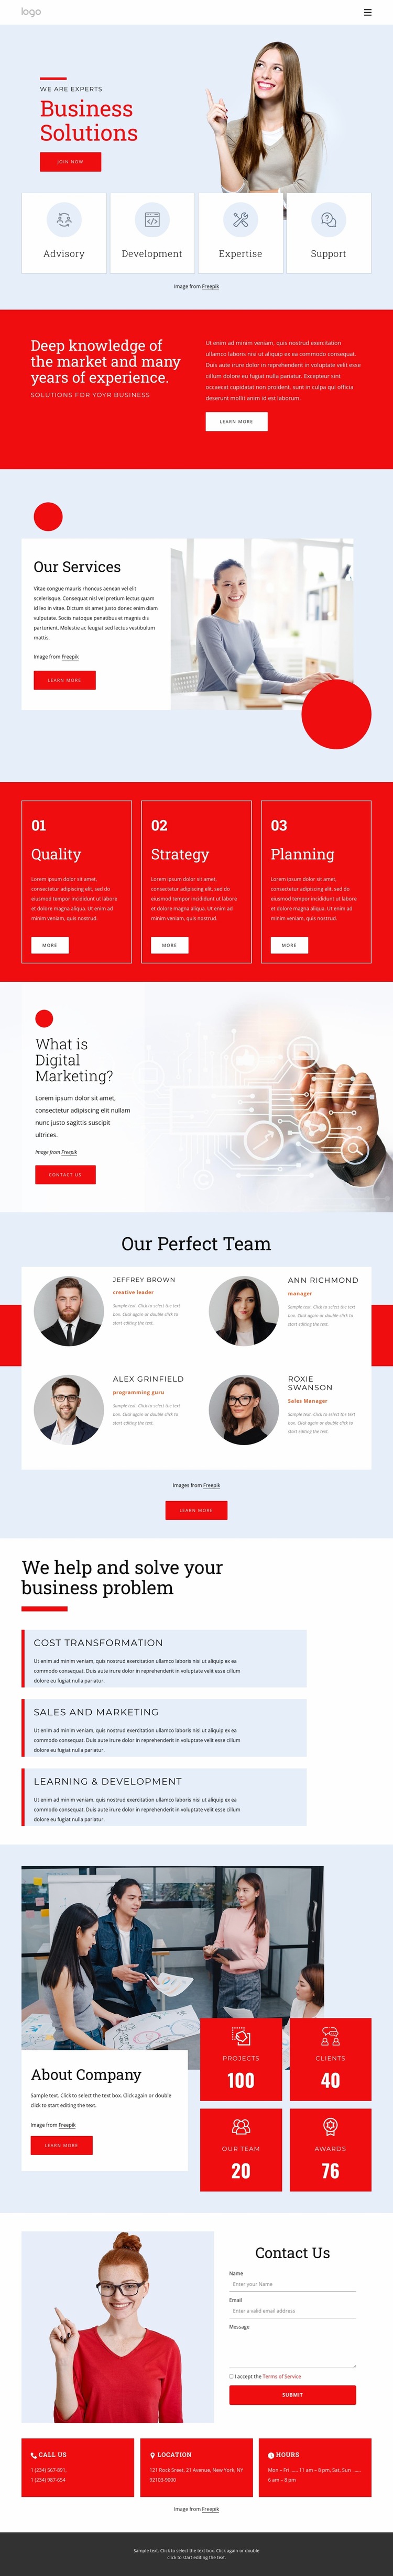 We are experts in business solutions Website Mockup